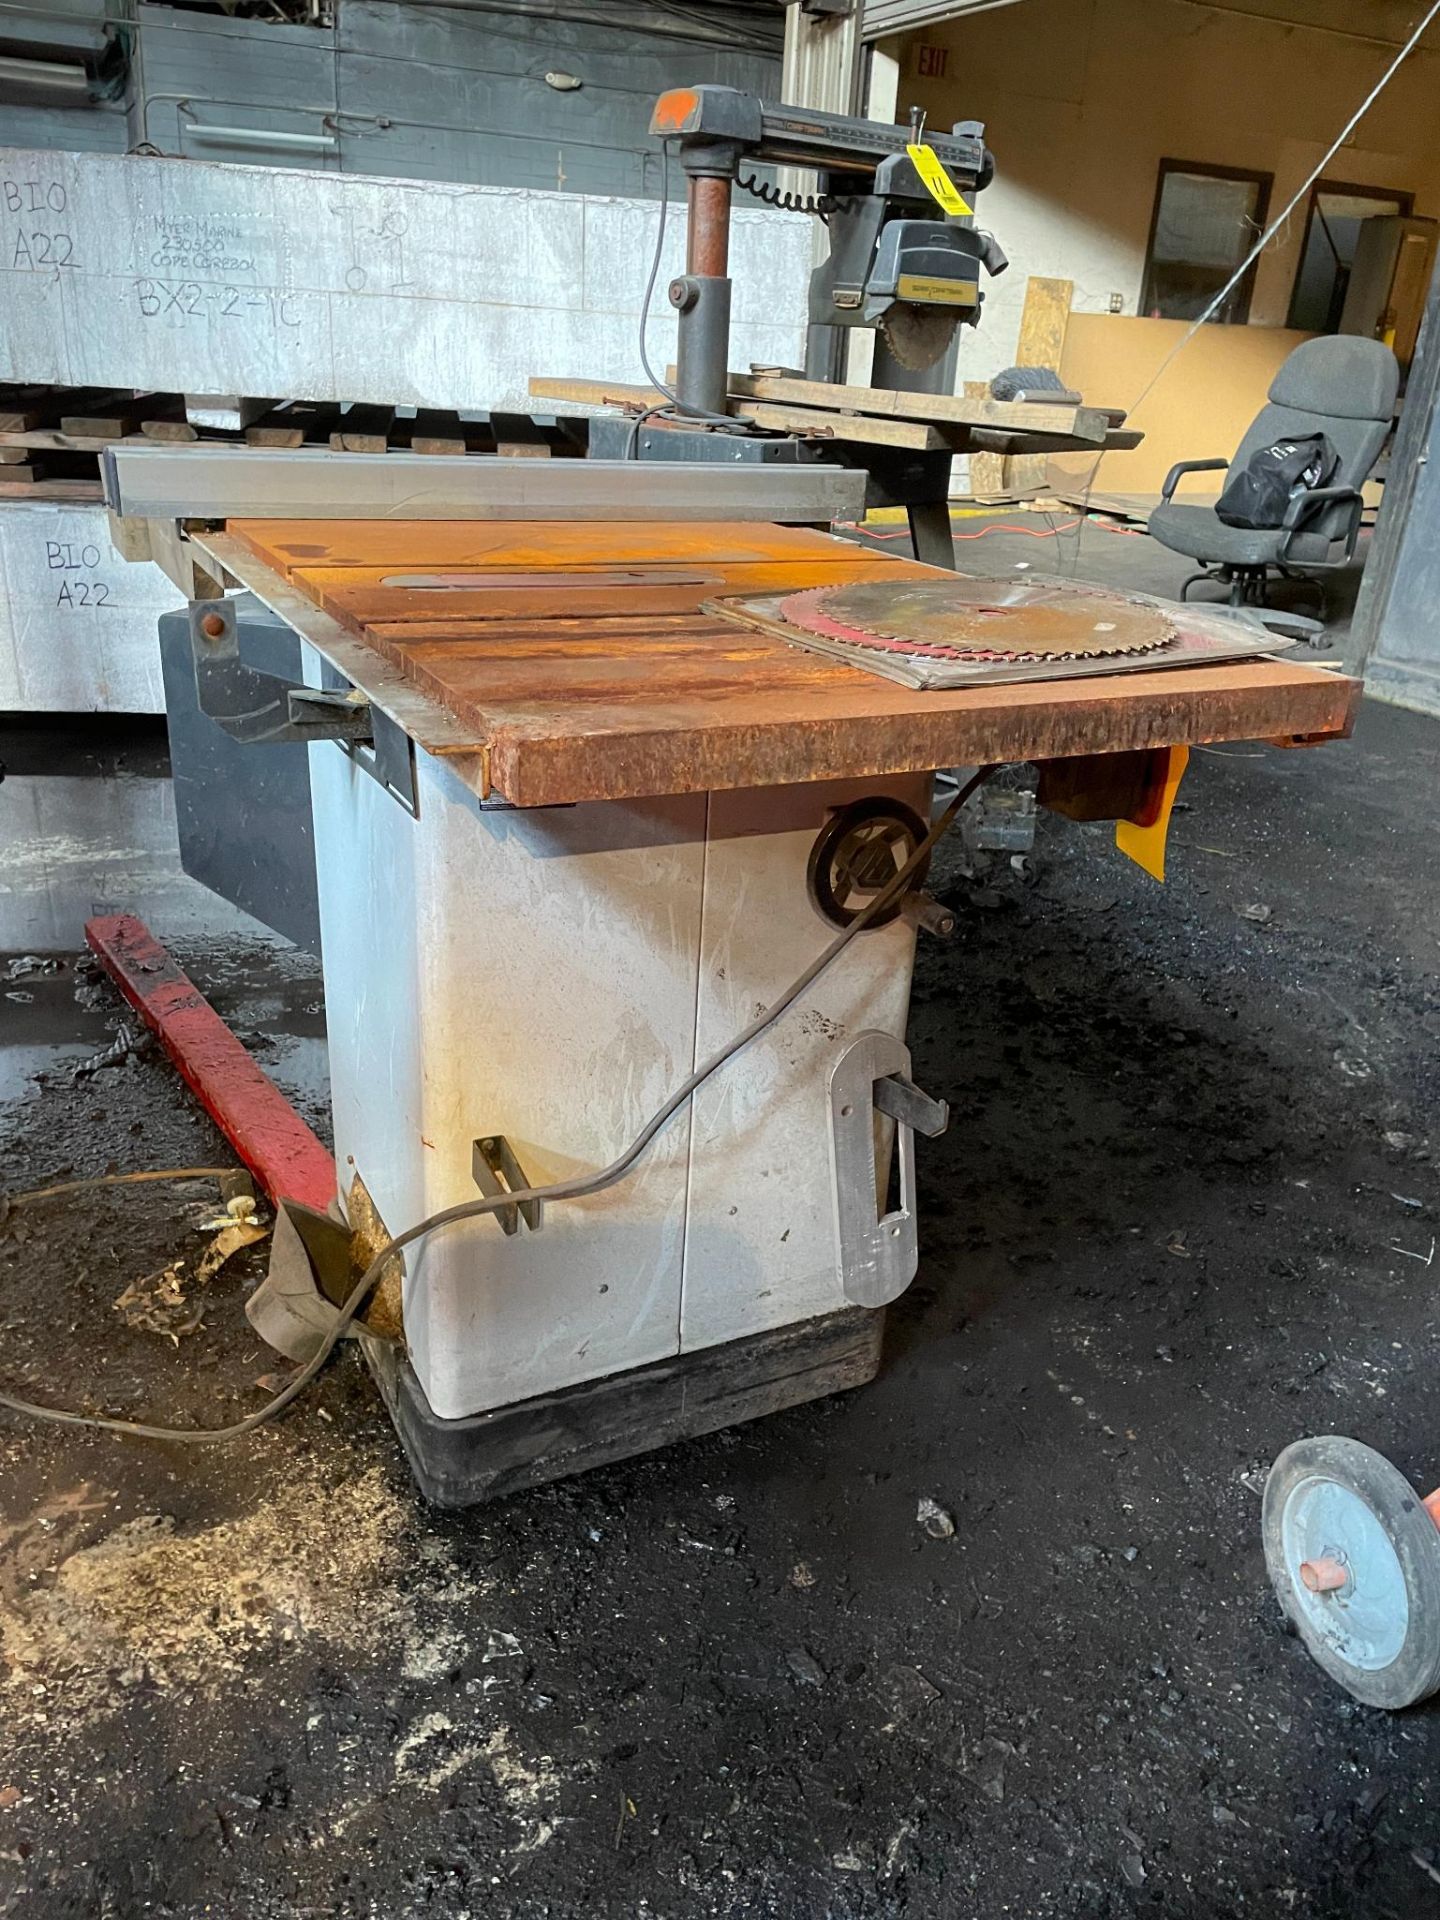 TABLE SAW, DELTA MDL. 36-714, 115/230 v., 1-3/4 HP, 3,600 RPM, S/N 30327 - Image 2 of 3